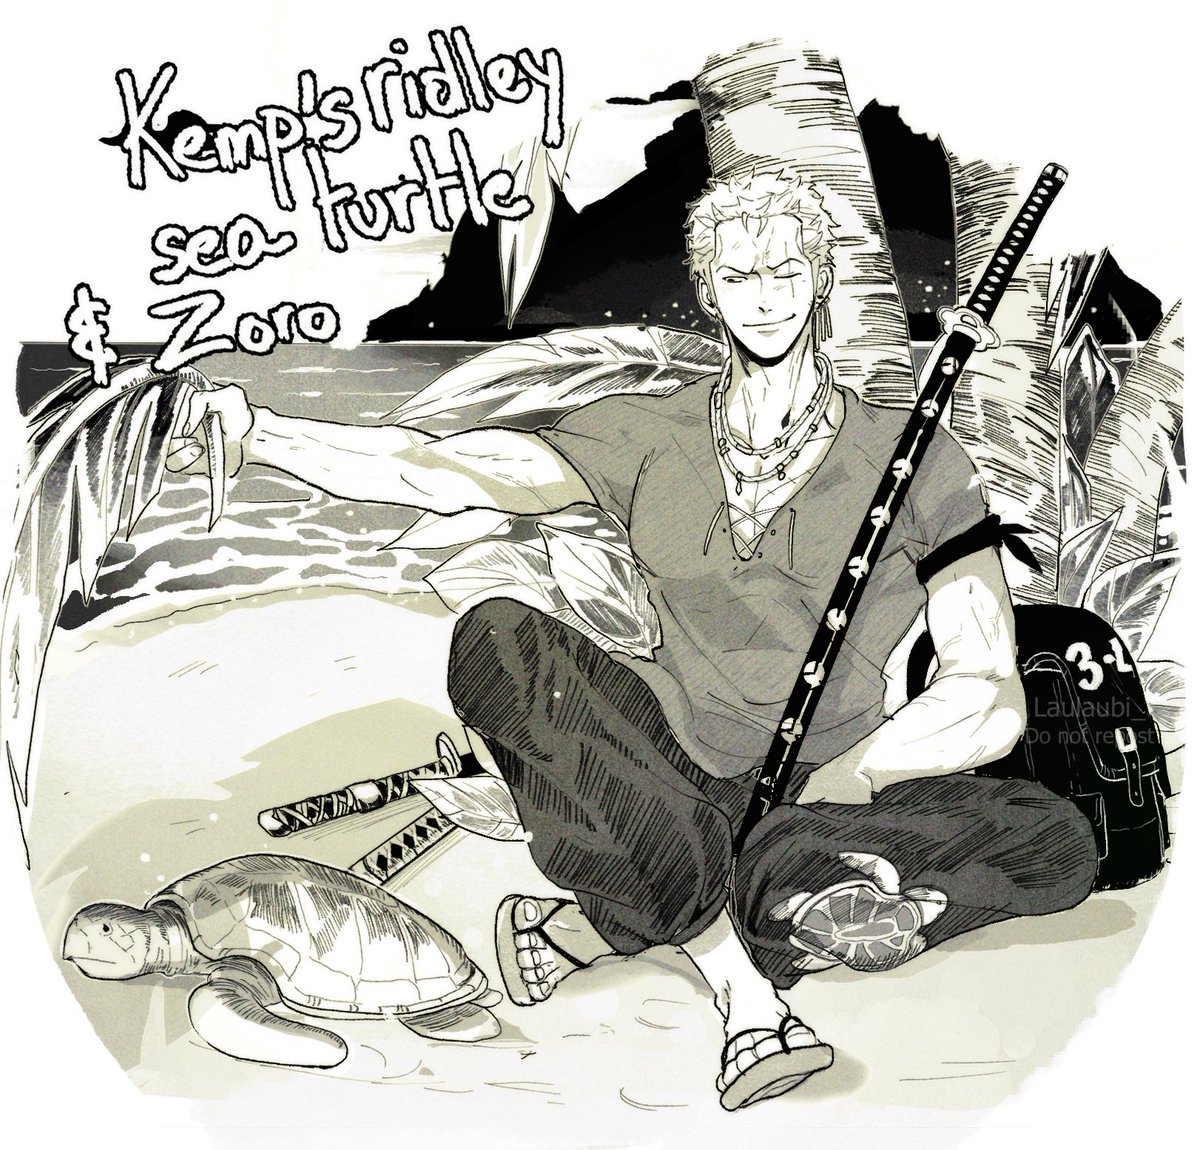 DAY 3-4: For the Endagered marine species x One piece inktober prompt, Zoro and the Kemp’s ridley sea turtle (Lepidochelys kempii), status: Critically endangered (less than 500)